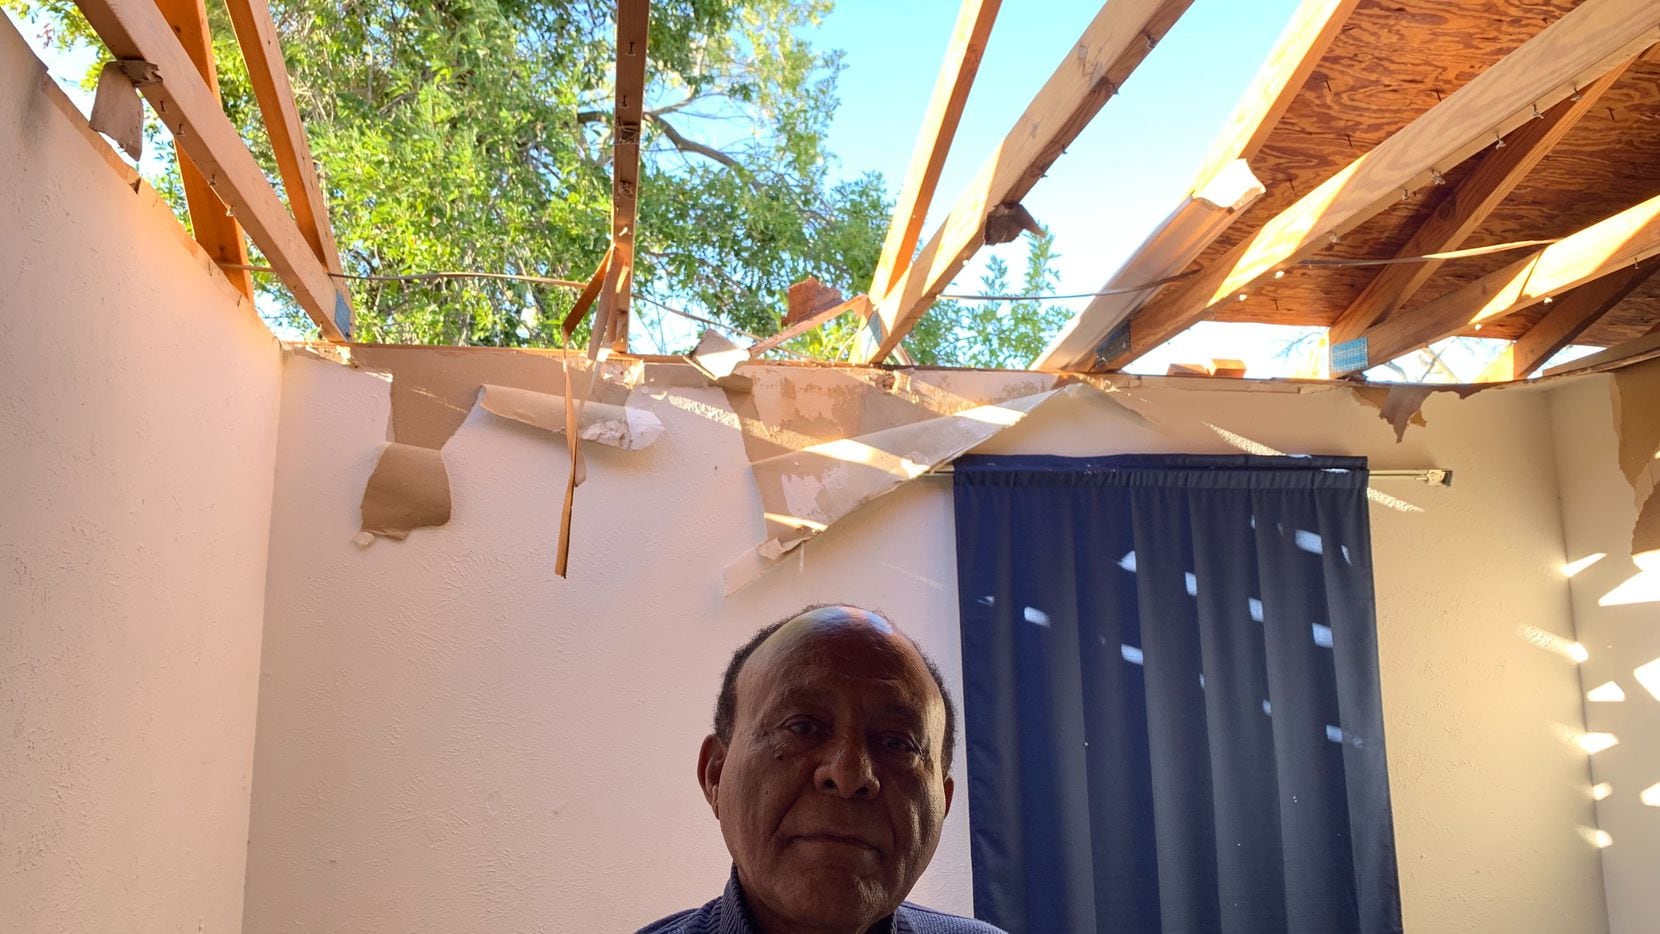 Gizaw Gedlu, 71, stands in his Richardson home that was destroyed by a tornado Sunday night.